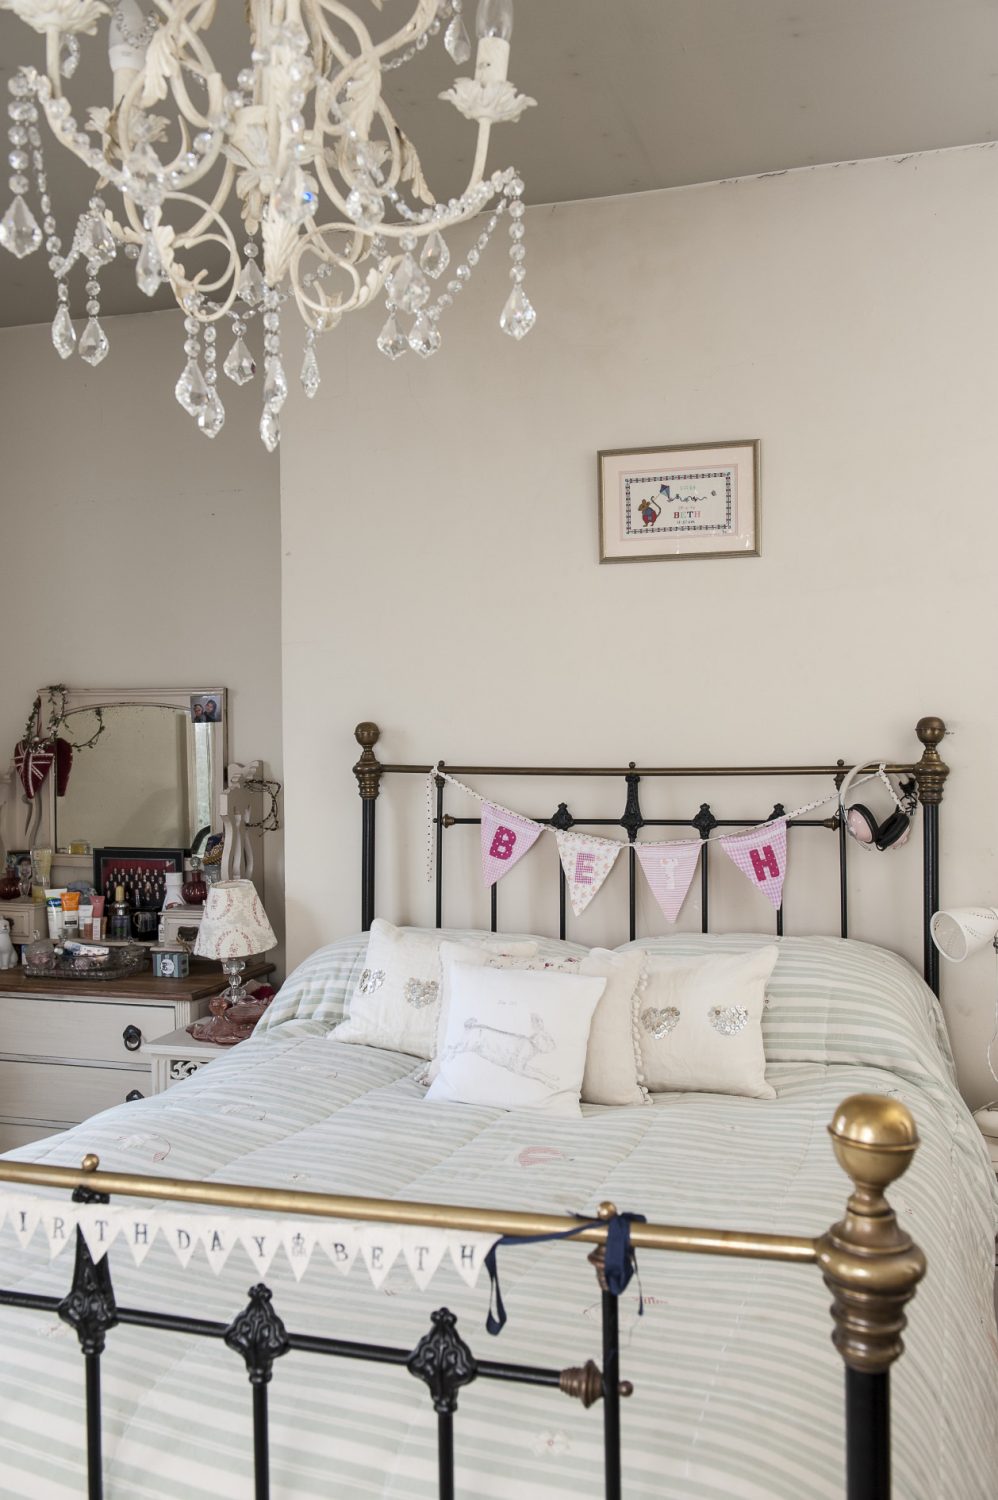 Daughter Beth’s room is graced by a brass and iron bedstead and glass chandelier